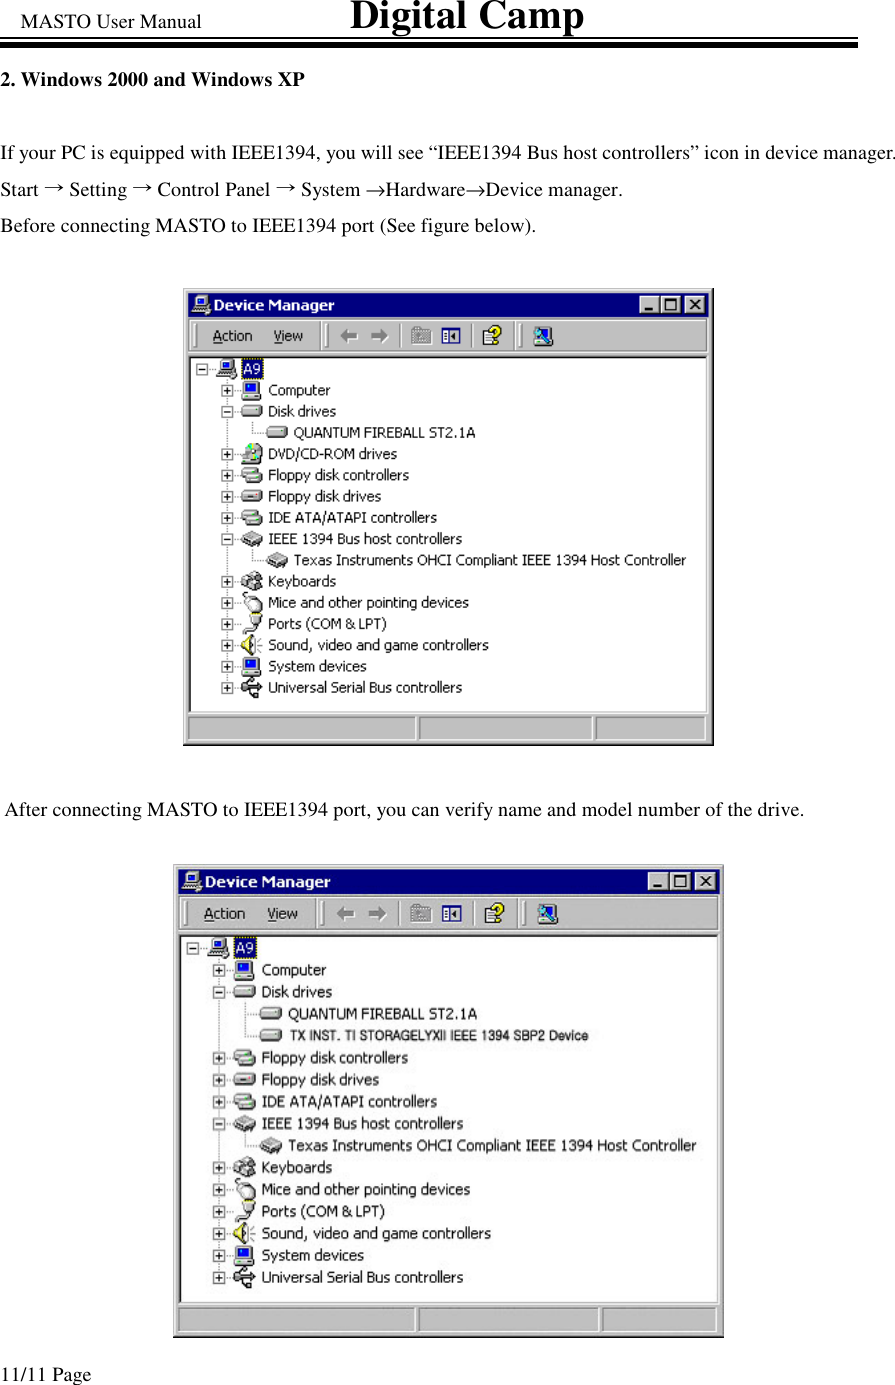 MASTO User Manual                             Digital Camp 11/11 Page 2. Windows 2000 and Windows XP   If your PC is equipped with IEEE1394, you will see “IEEE1394 Bus host controllers” icon in device manager. Start Setting Control Panel System →Hardware→Device manager.     Before connecting MASTO to IEEE1394 port (See figure below).  After connecting MASTO to IEEE1394 port, you can verify name and model number of the drive.  